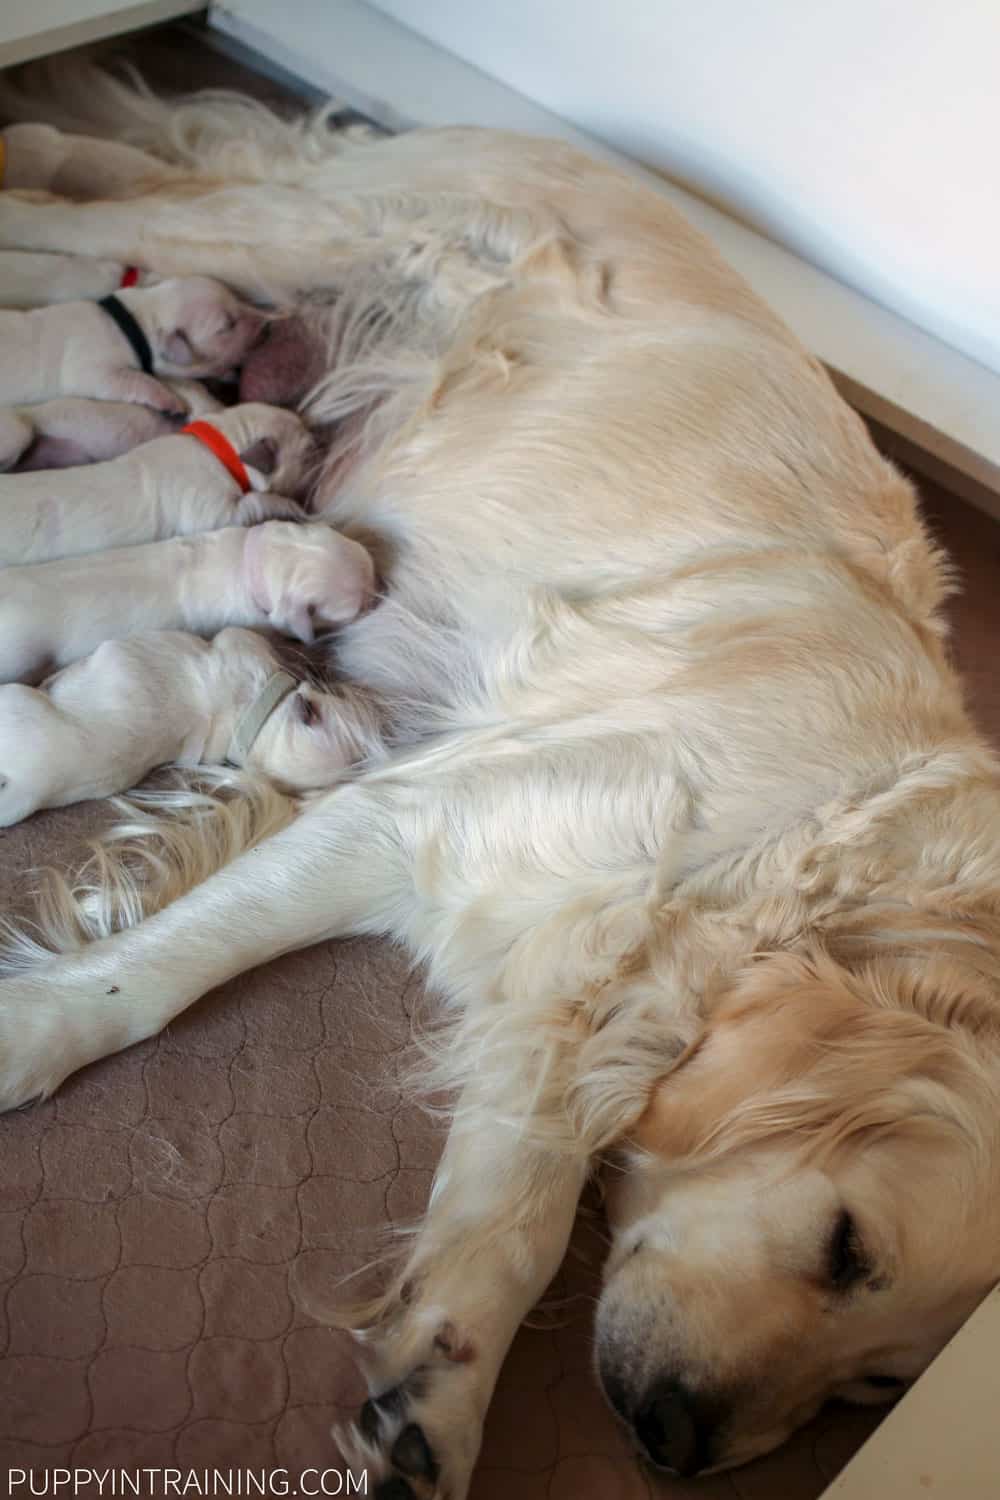 How Long Are Golden Retriever S Pregnant Puppy In Training,Char Broil Grill Reviews Reddit